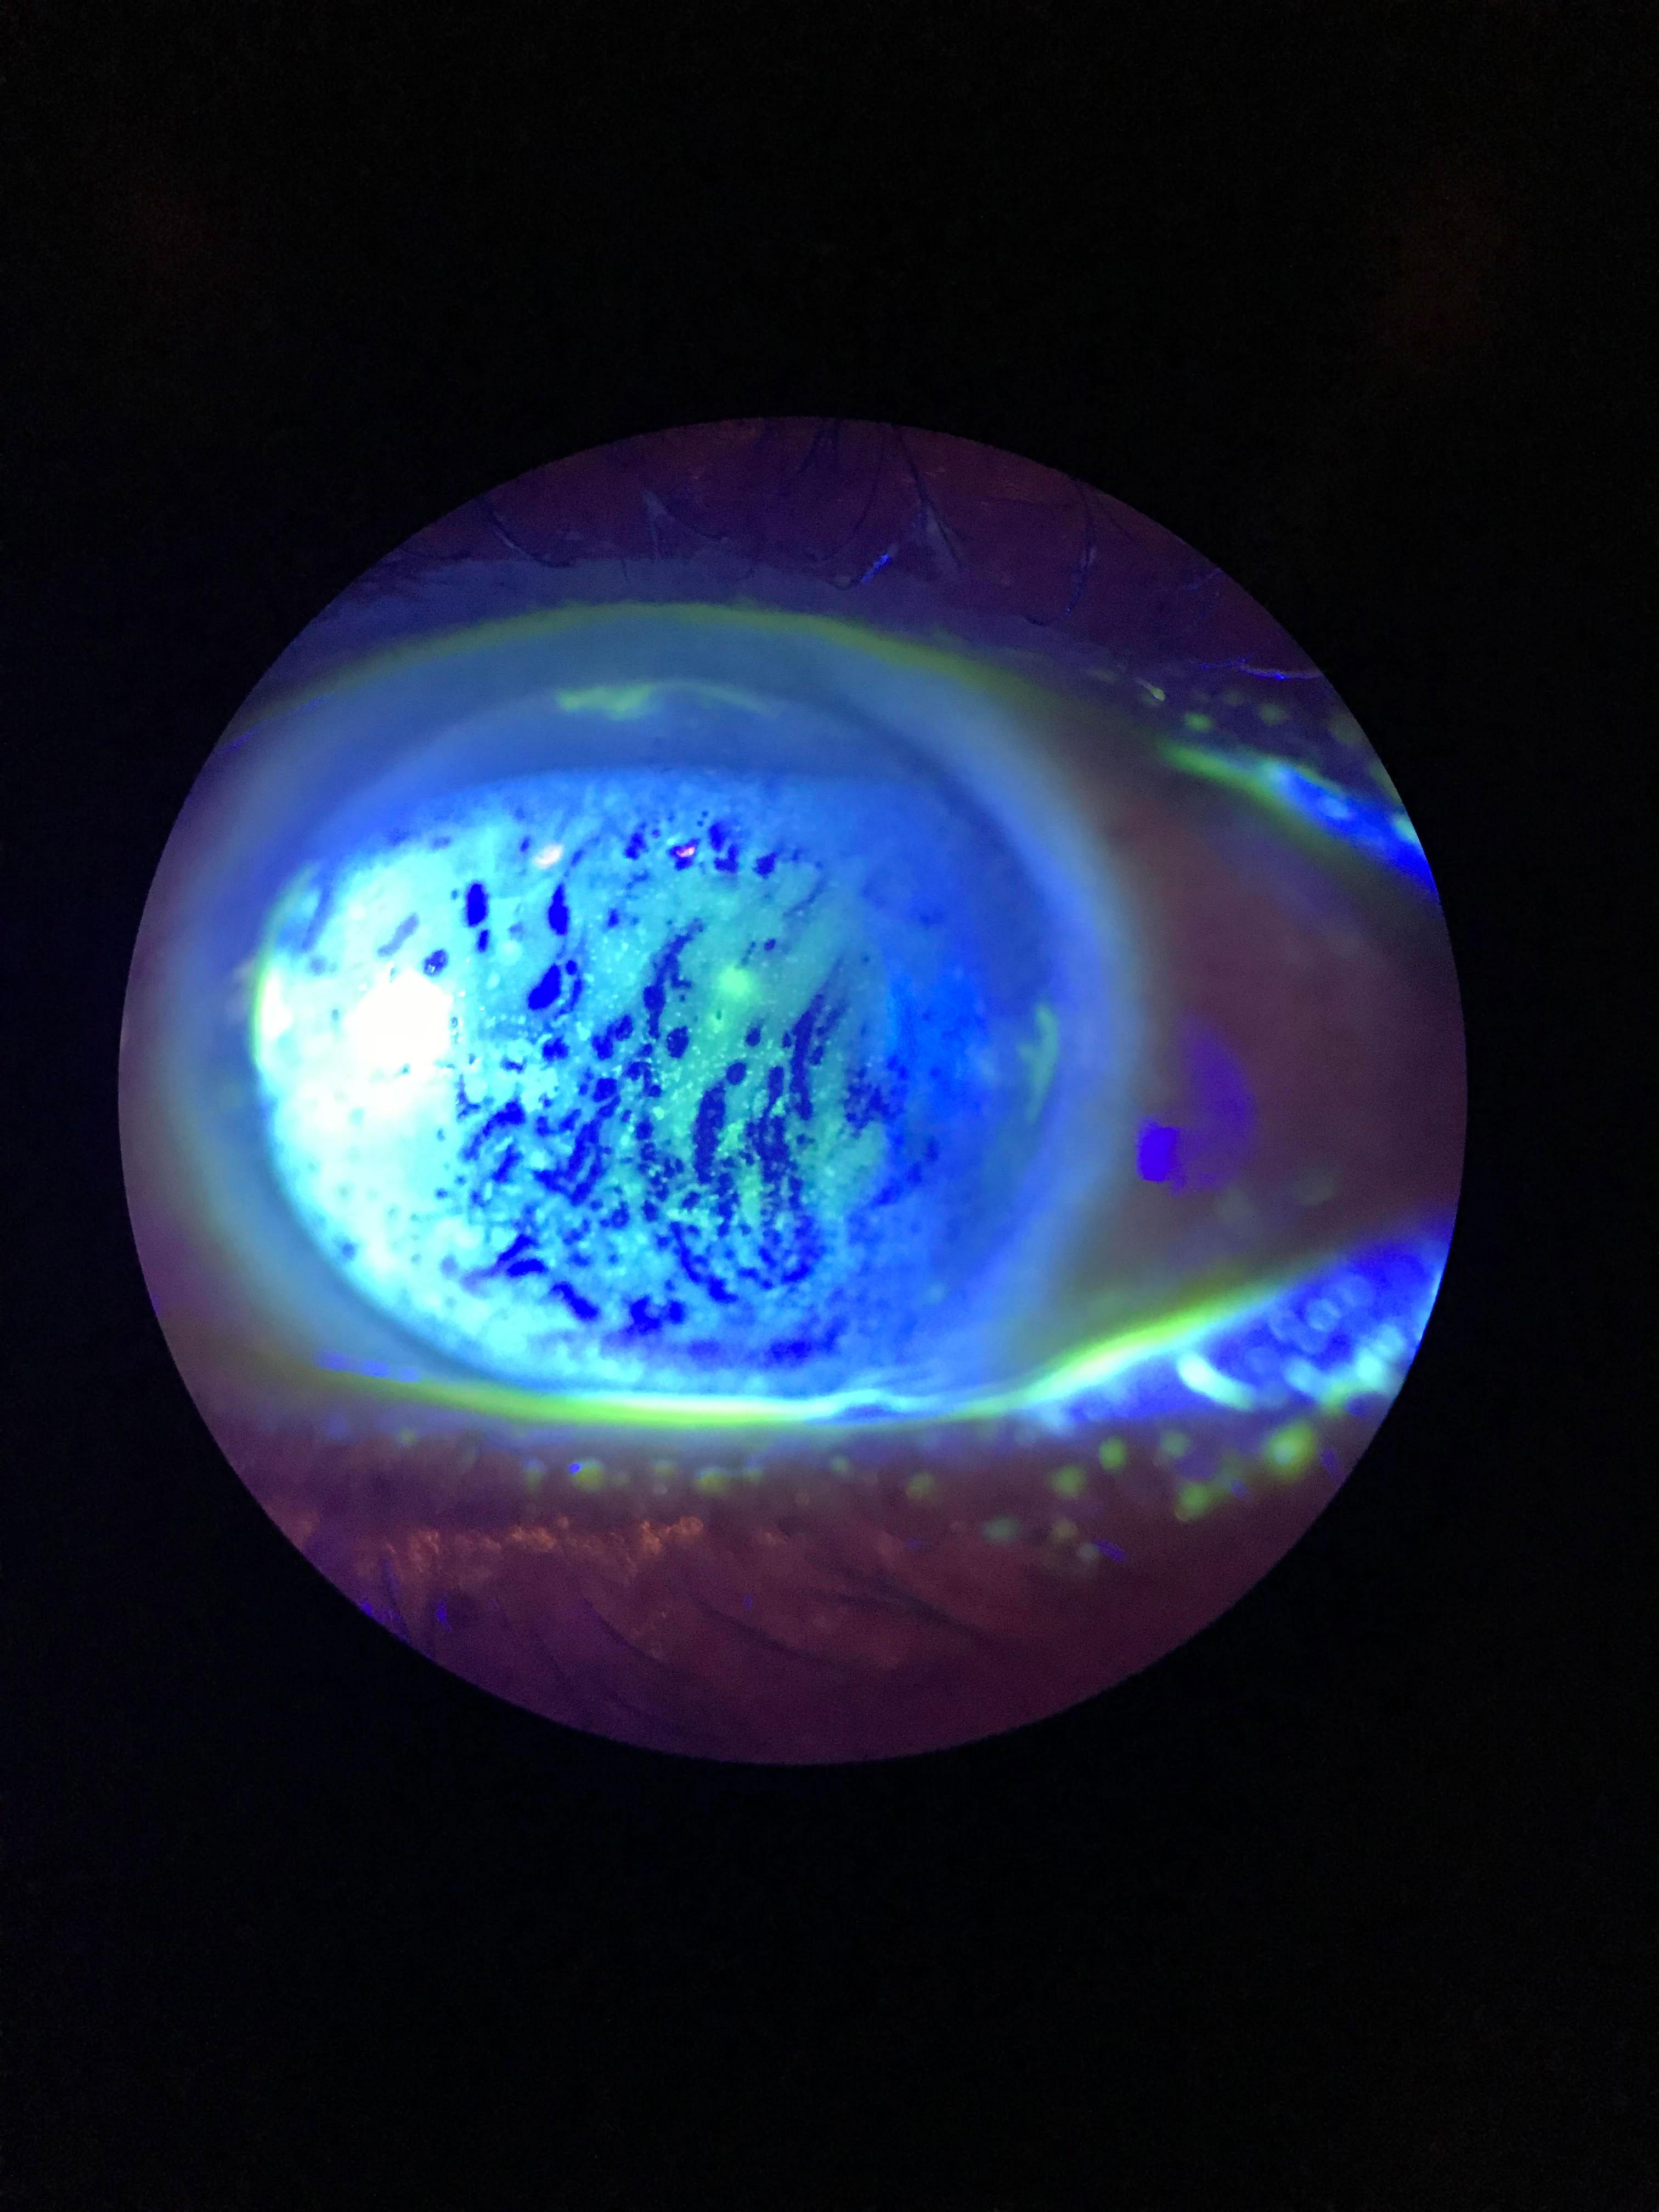 This patient displays diffuse superficial punctate keratitis (SPK) with a decreased TBUT.